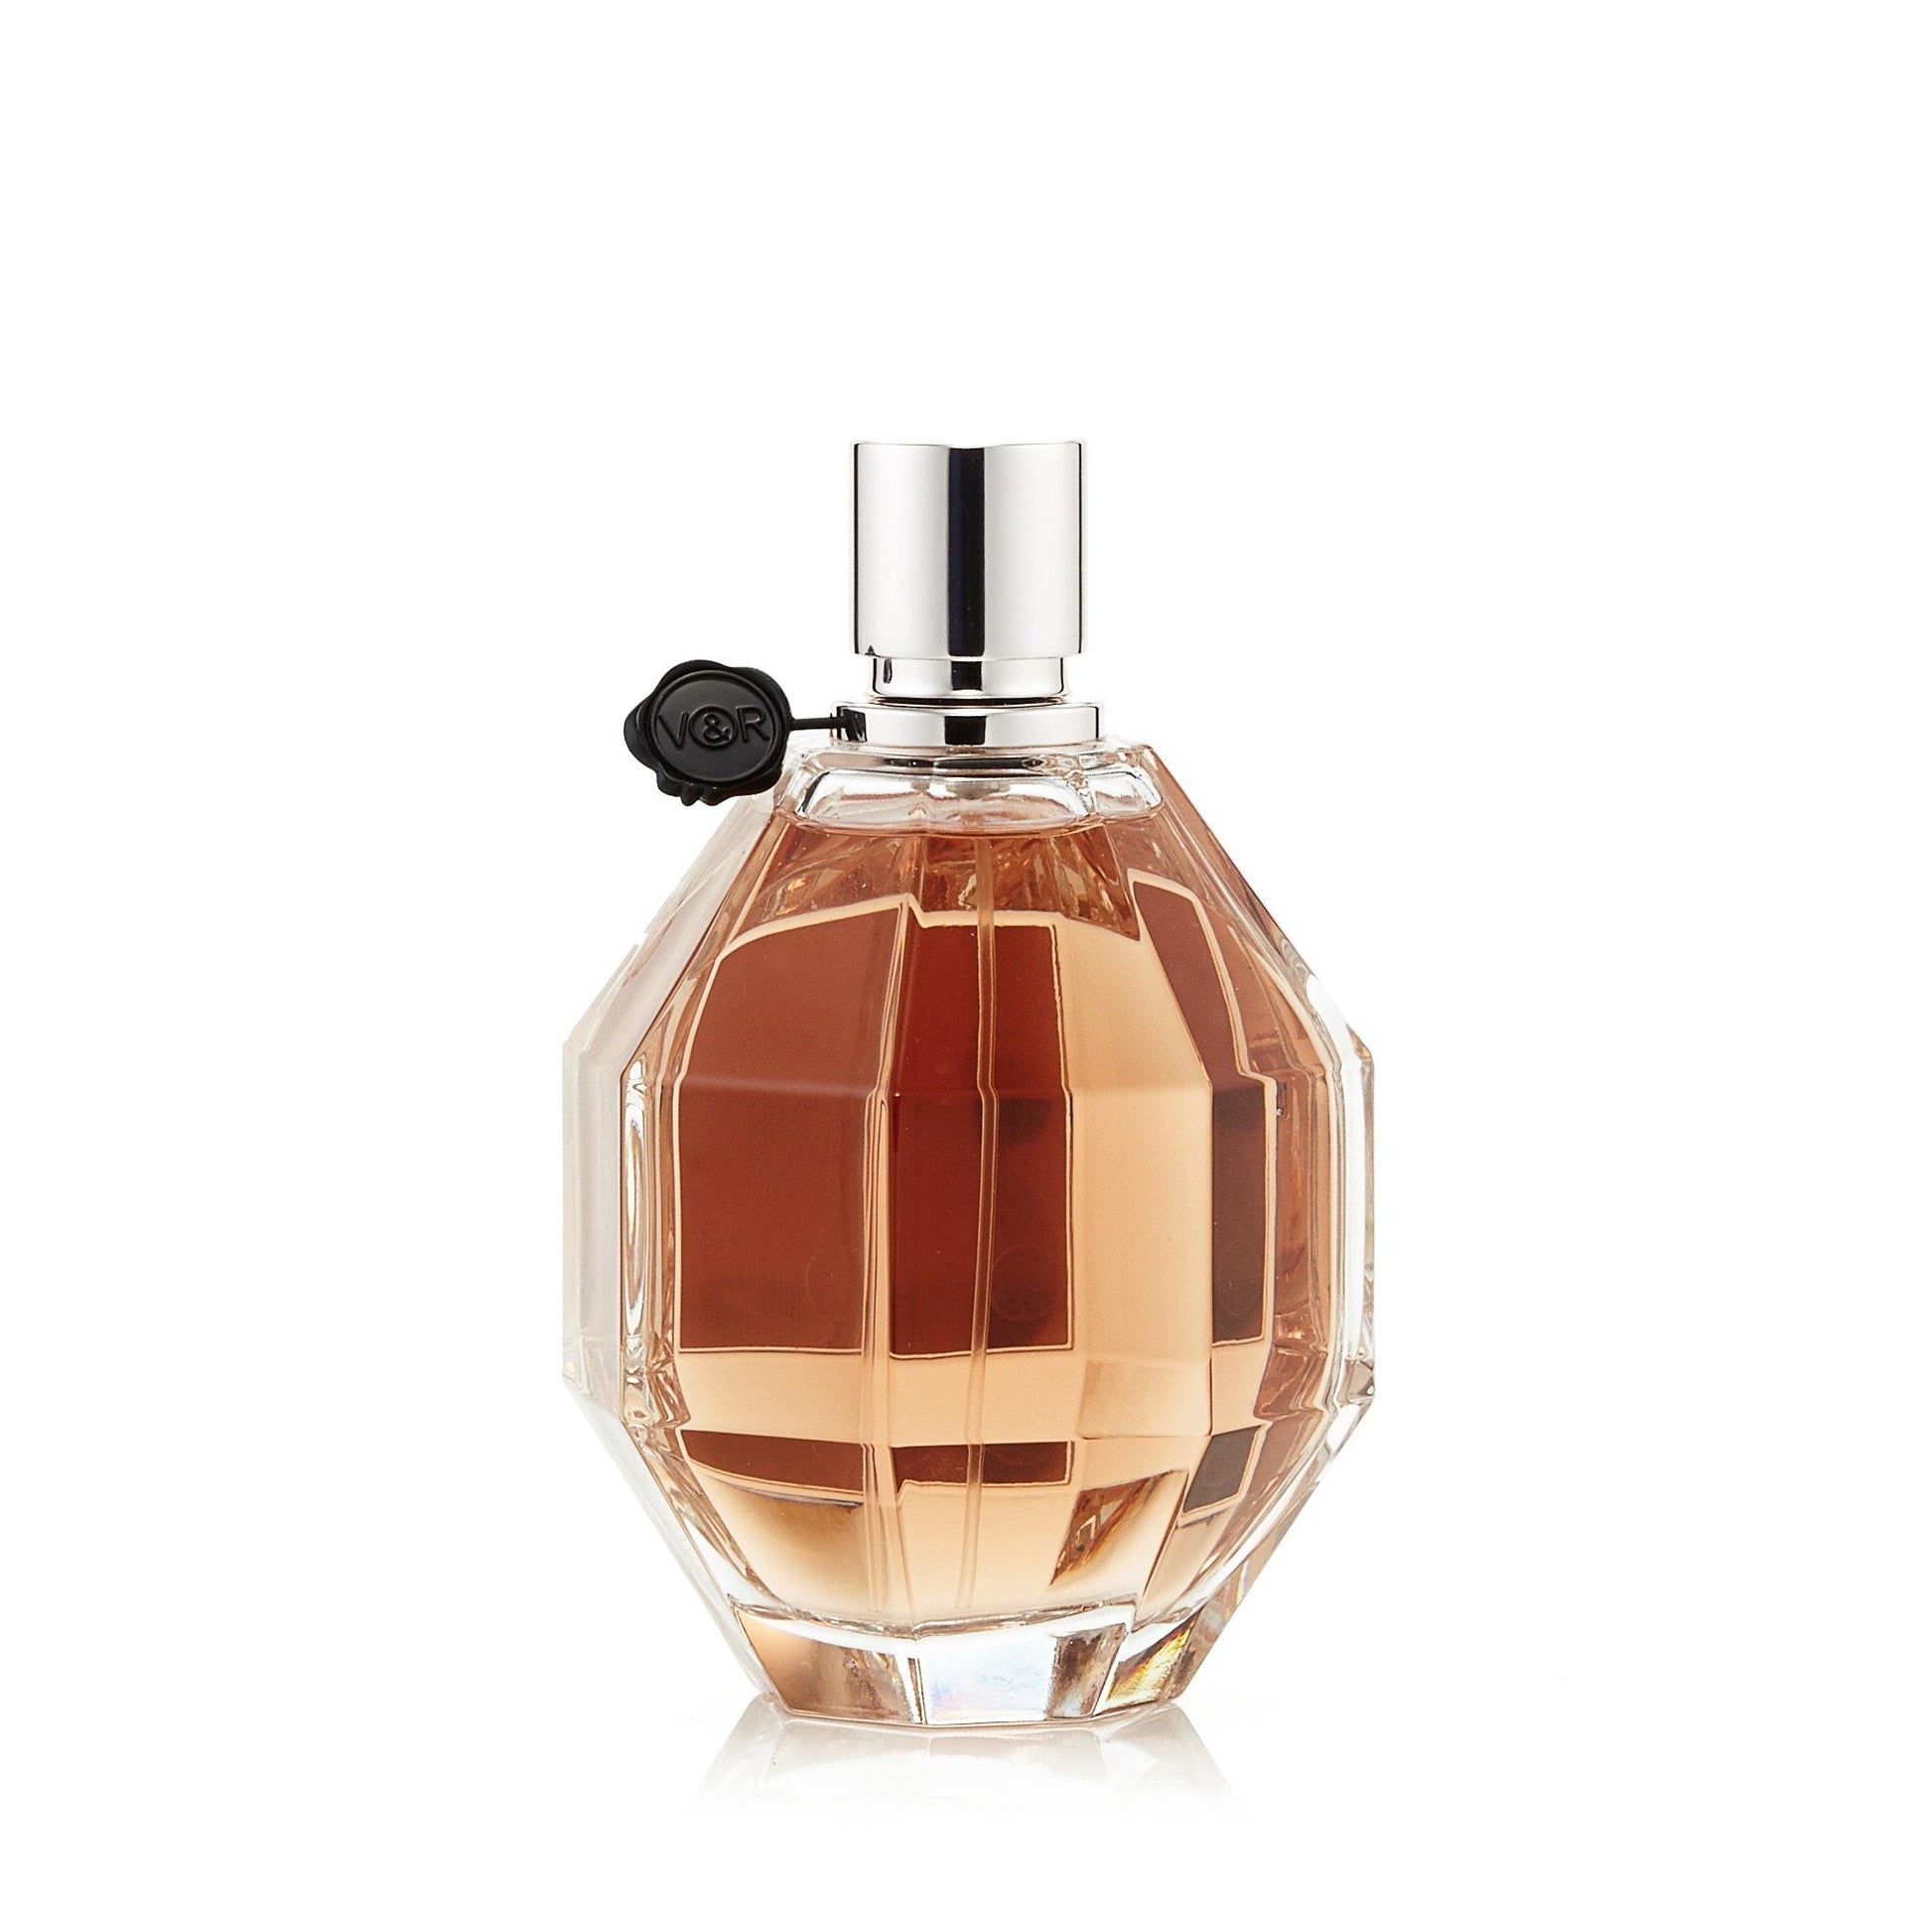 Flowerbomb EDP for Women by Viktor & Rolf, Product image 8